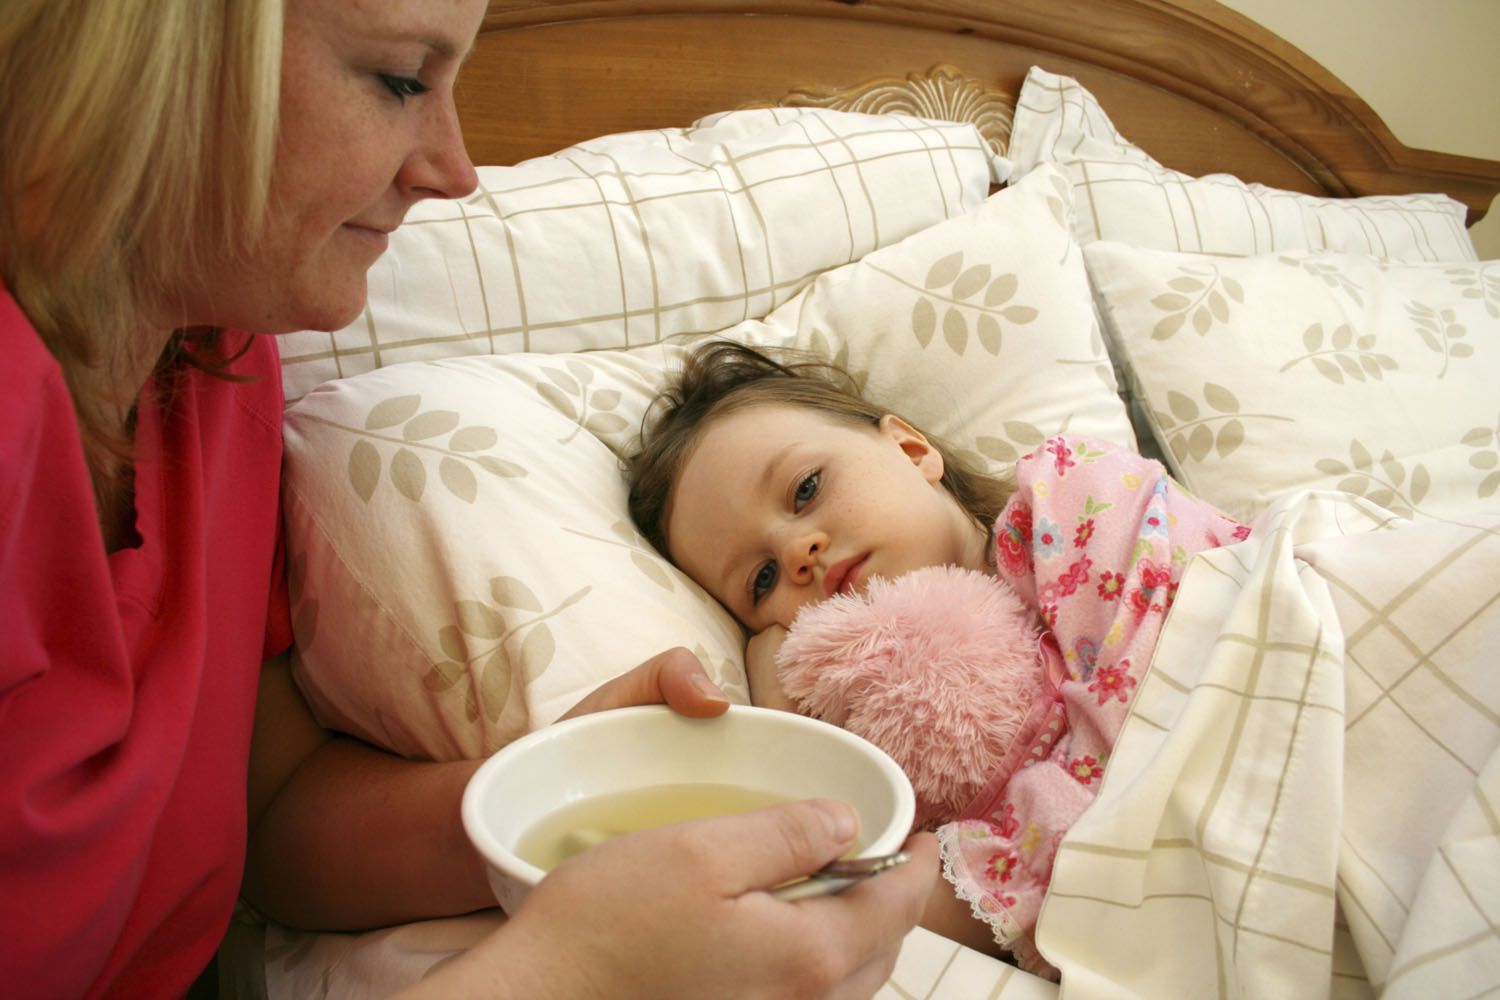 Common Home Remedies for Sick Kids